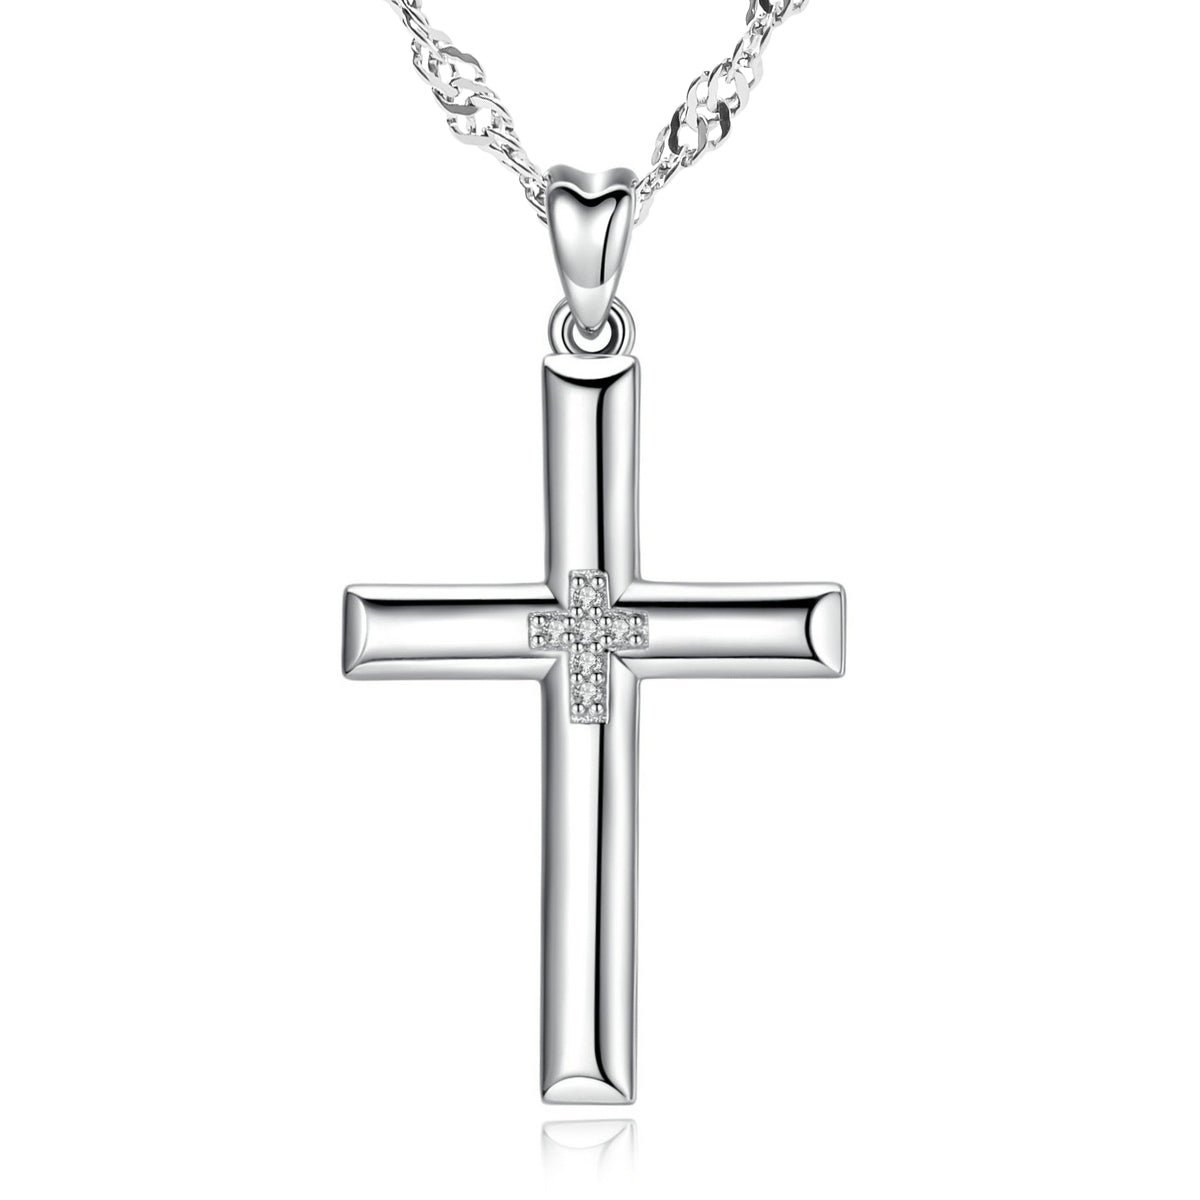 Christian Crystal Cross pendant with 925 Sterling Silver Water Wave necklace chain 18"